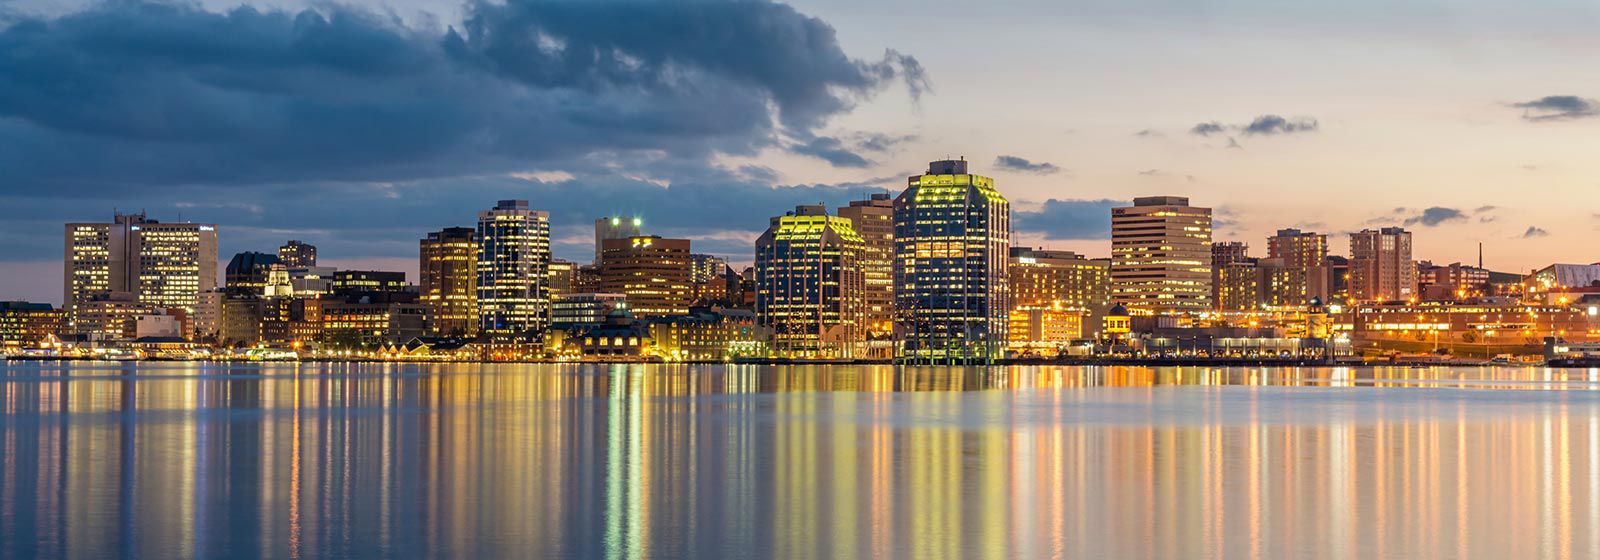 Waterfront and skyline of Halifax